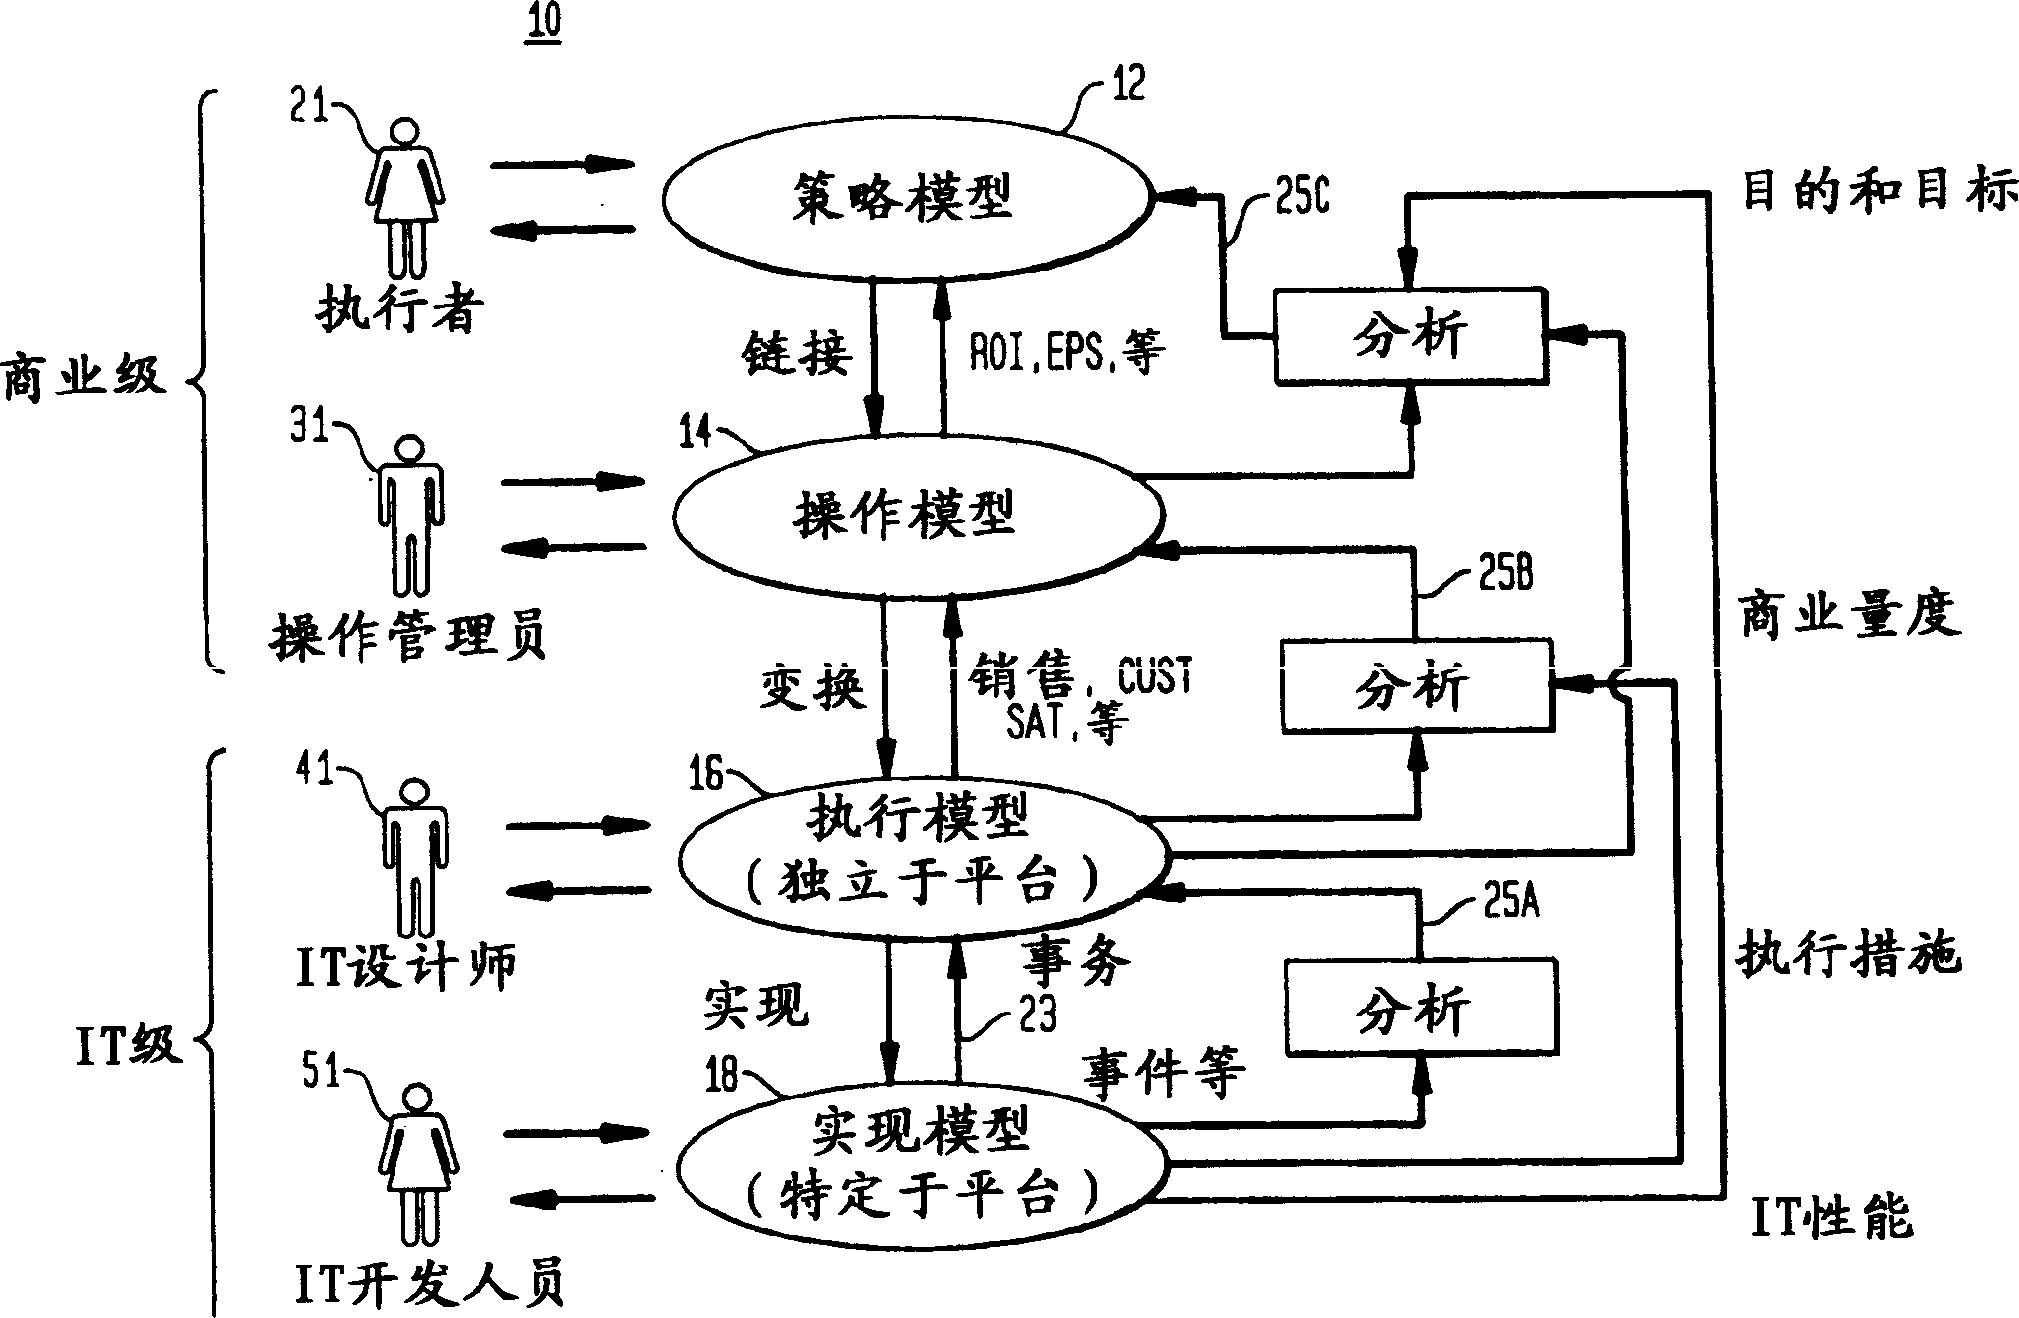 System and method for generation and management of integrated solution in business process